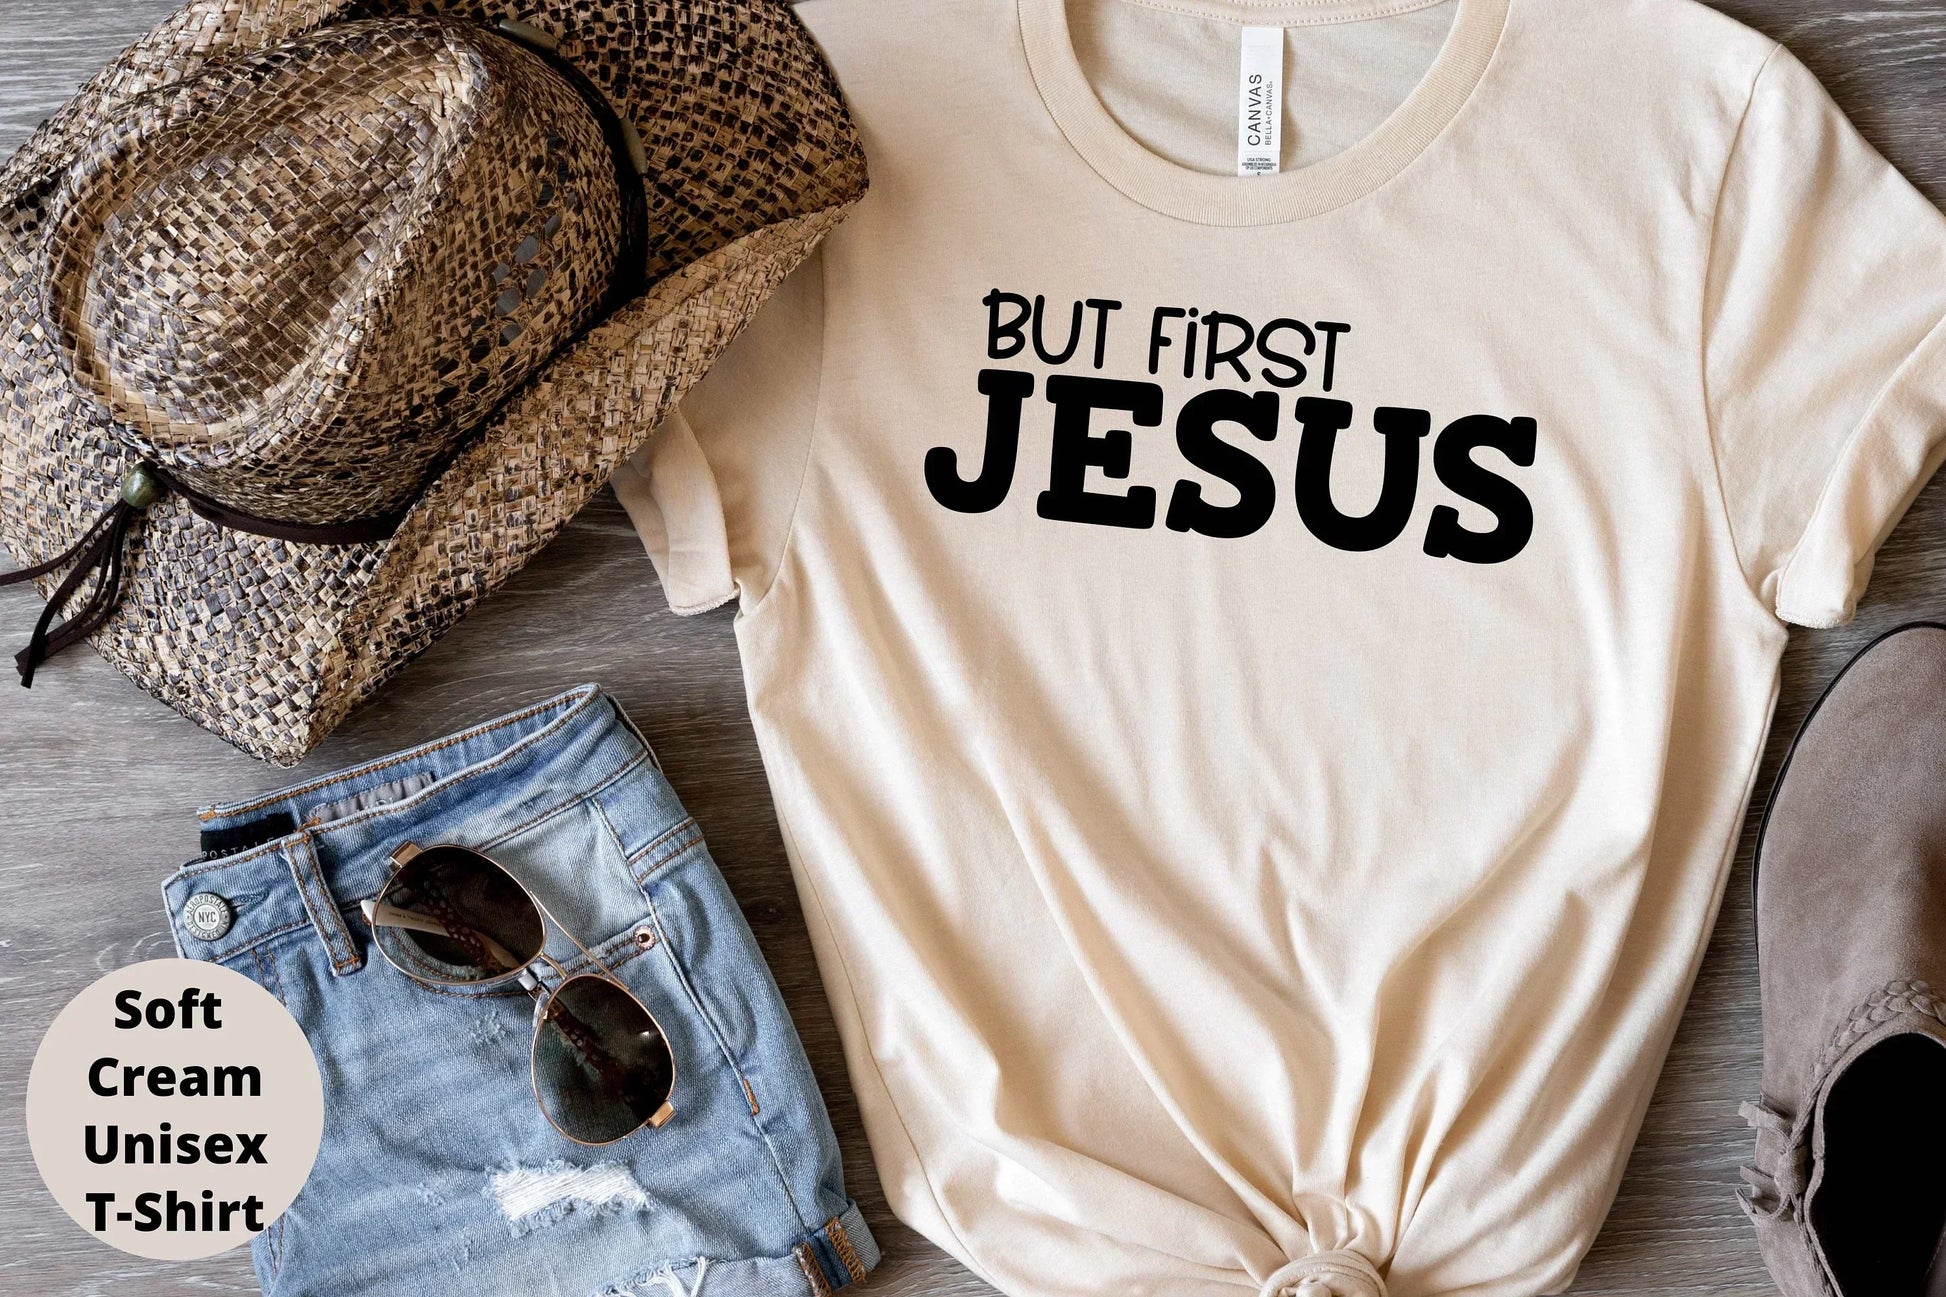 But First Jesus, Comfortable Christian Shirt about God